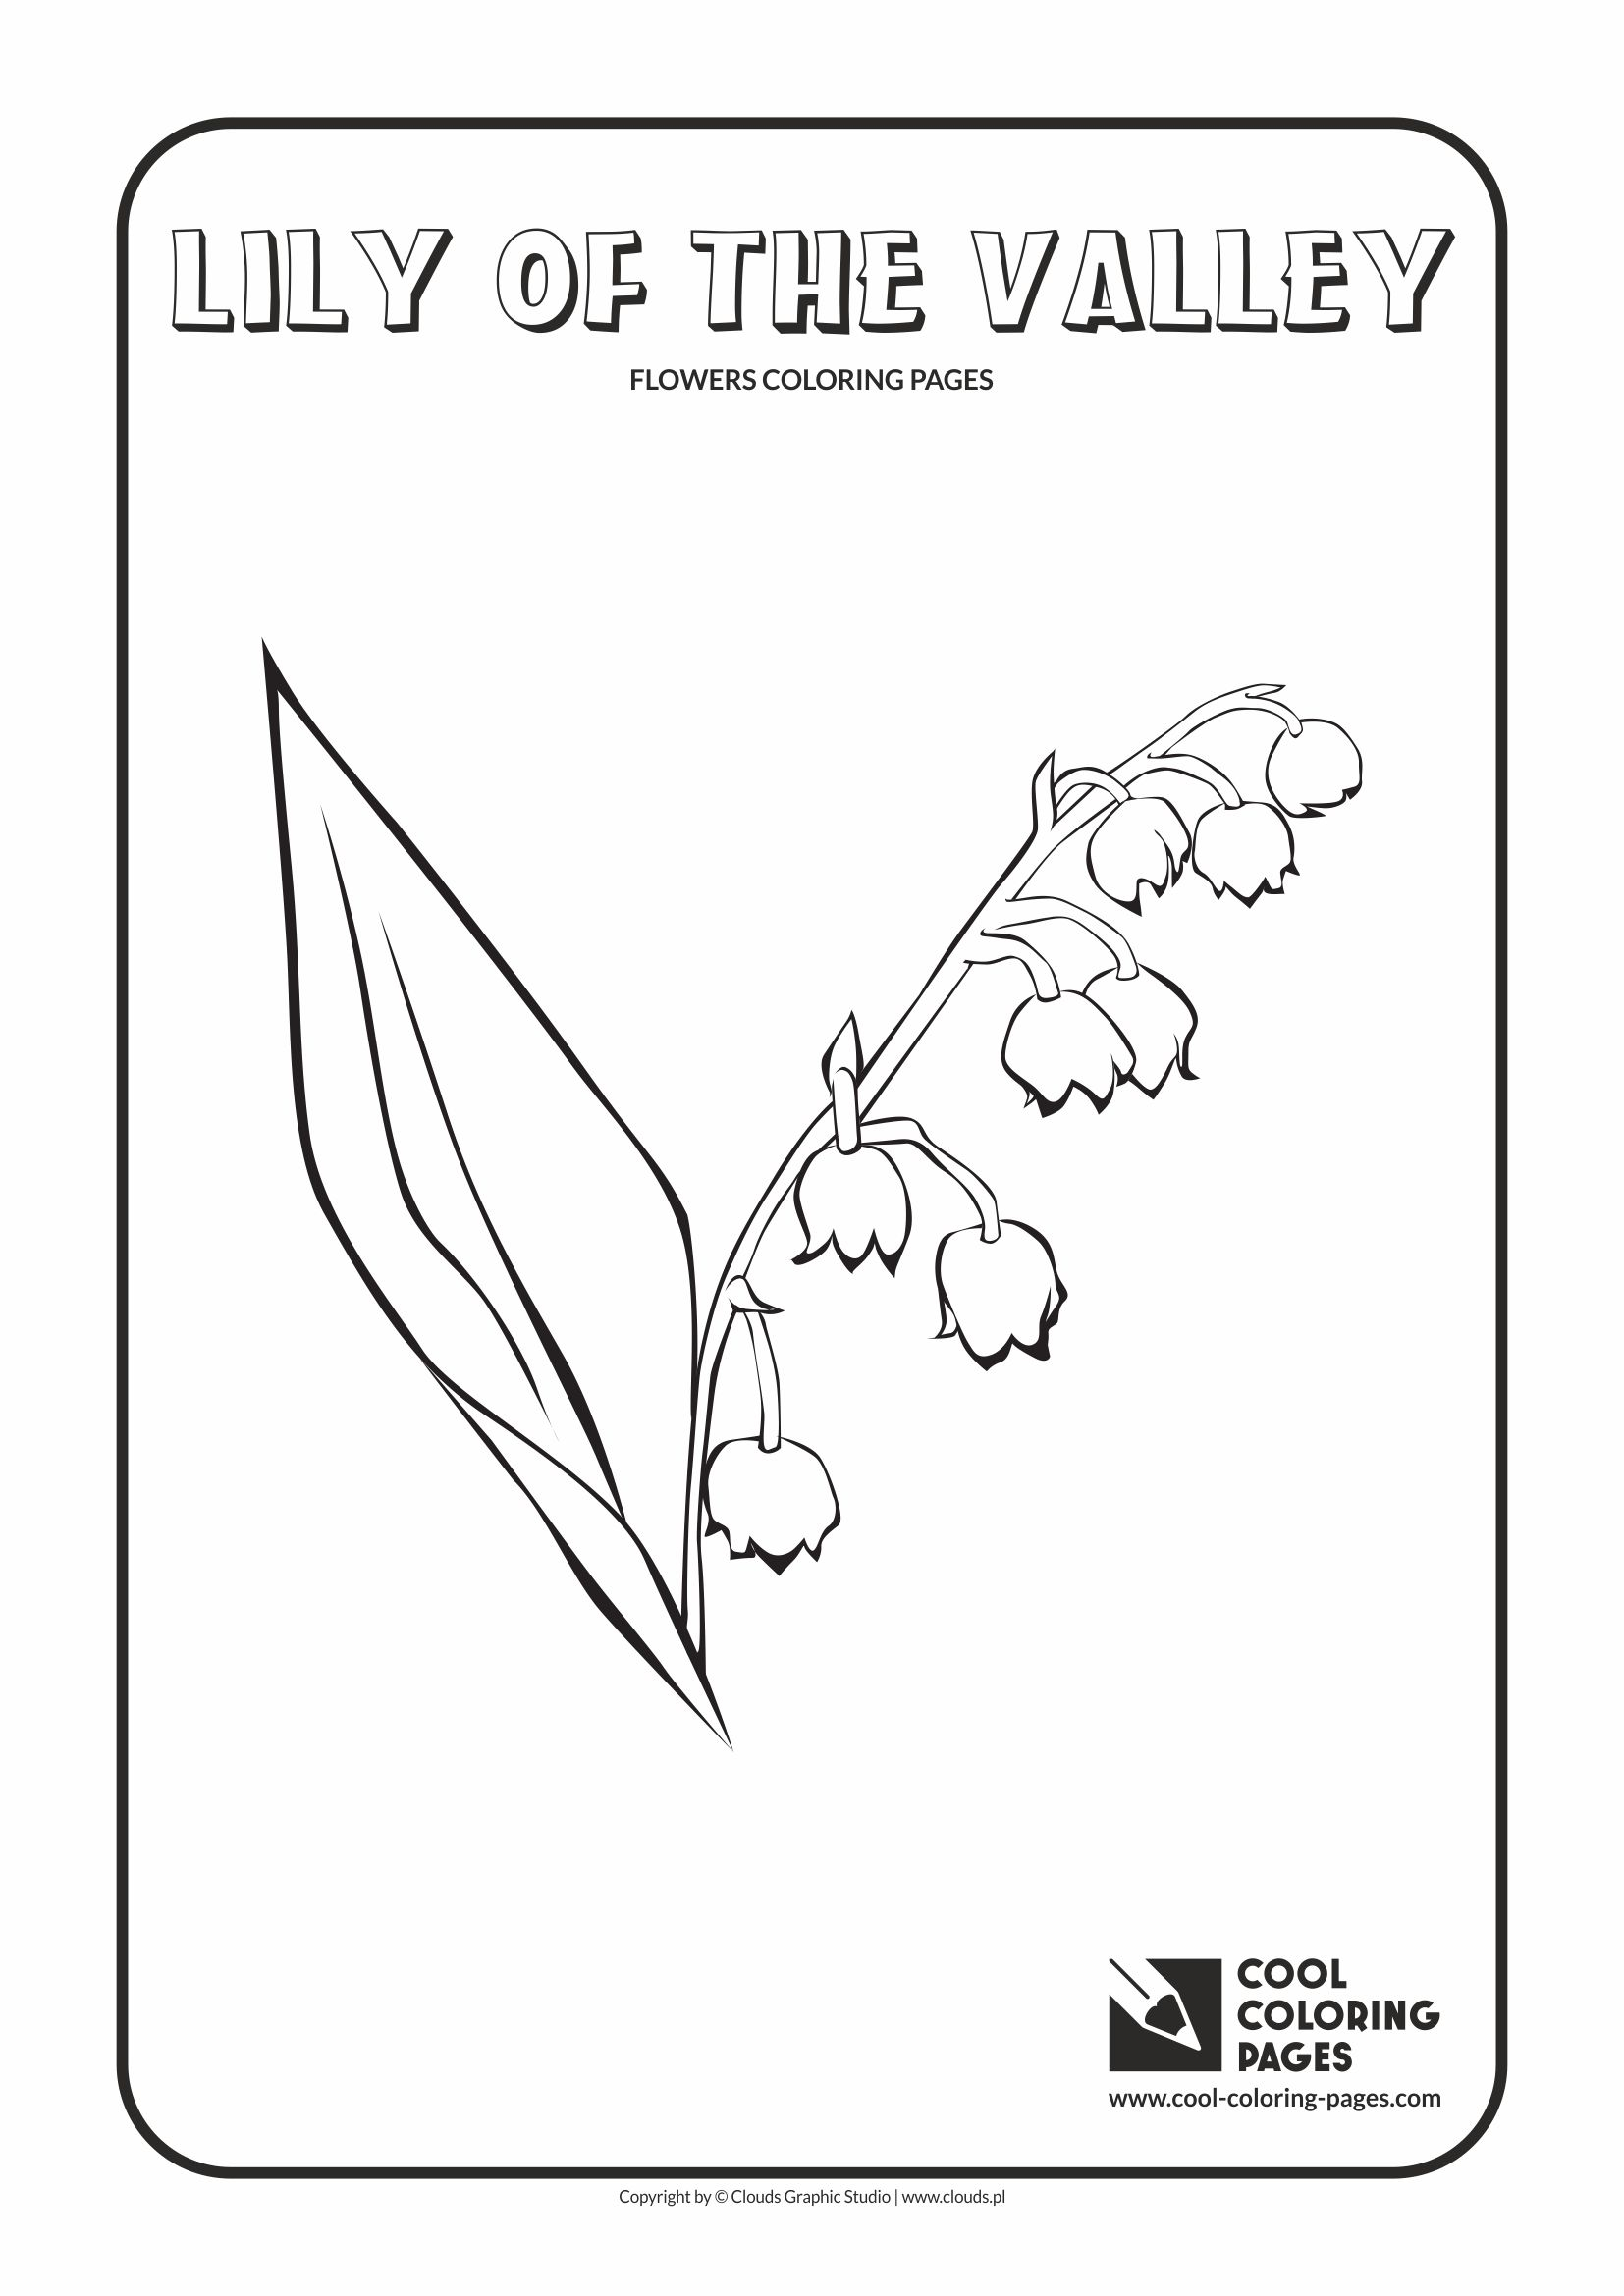 Lily Of The Valley Coloring Page Cool Coloring Pages Lily Of The Valley Coloring Page Cool Coloring